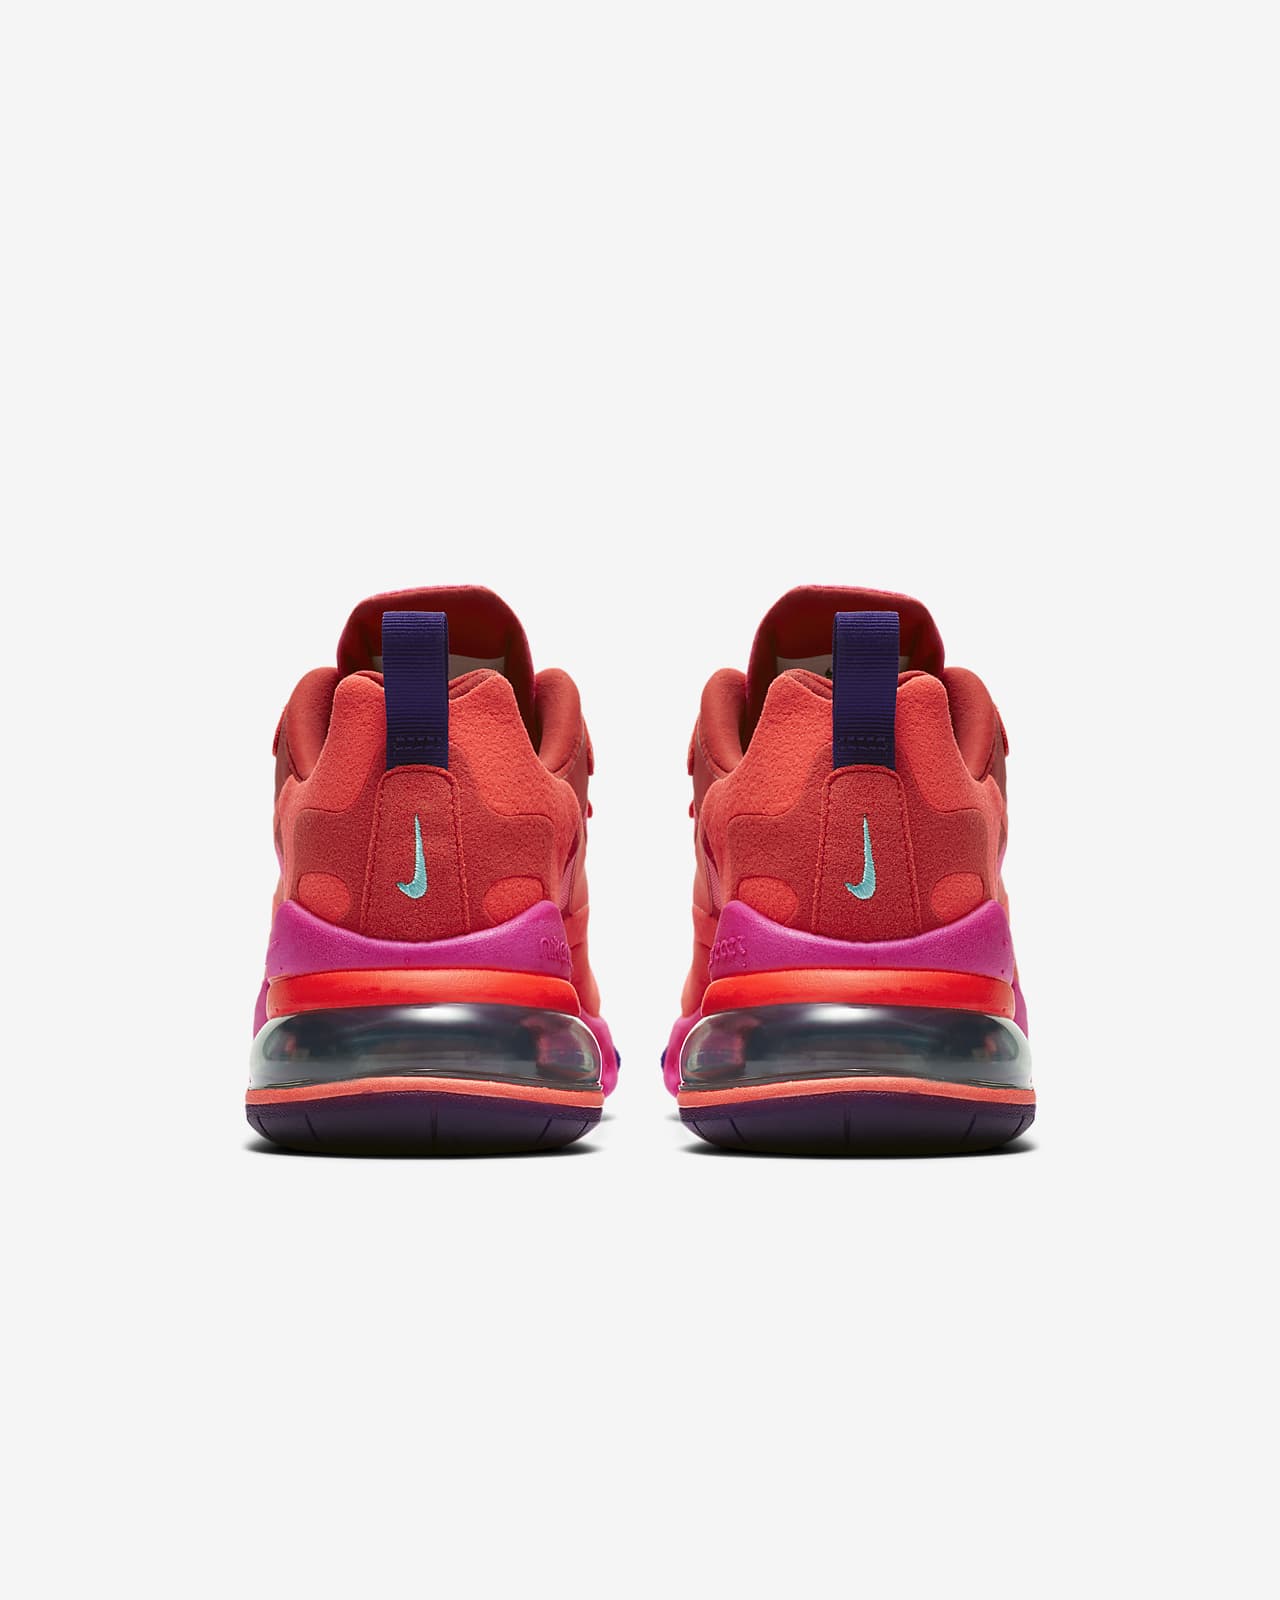 nike air max 270 red running shoes